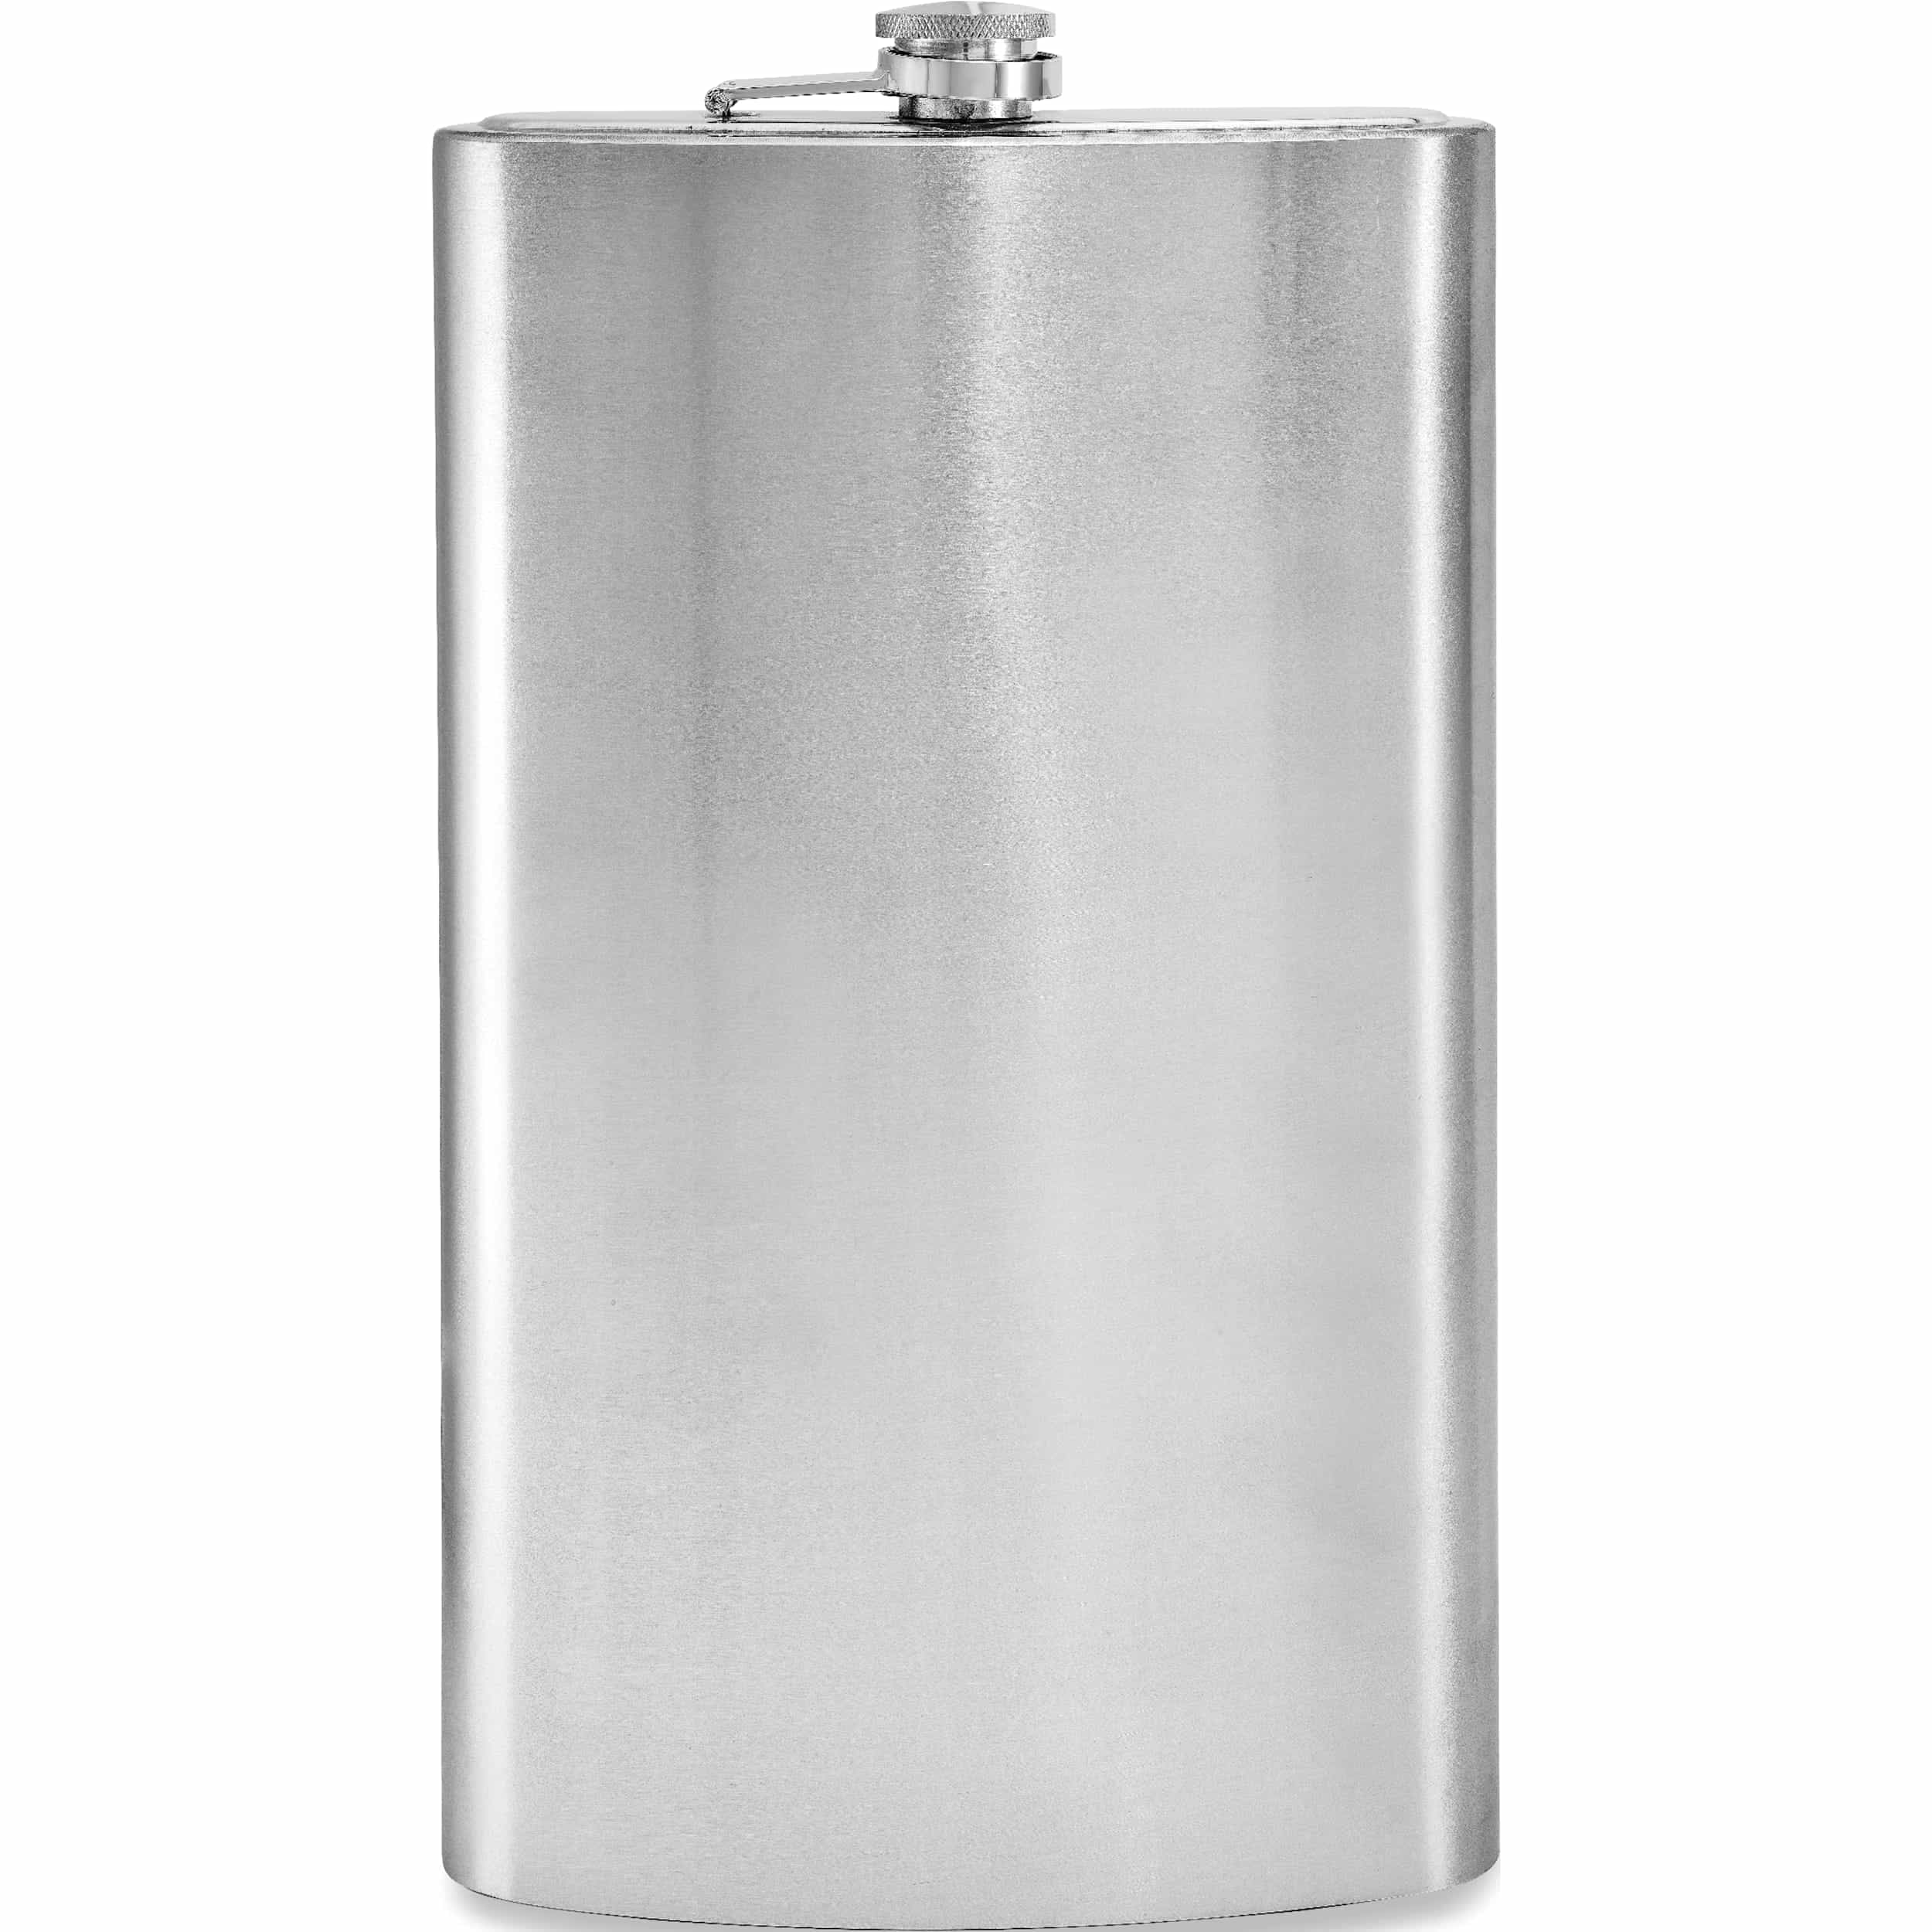 64oz Stainless Steel FLASK Alcohol Whiskey Liquor Large 1/2 Gallon 